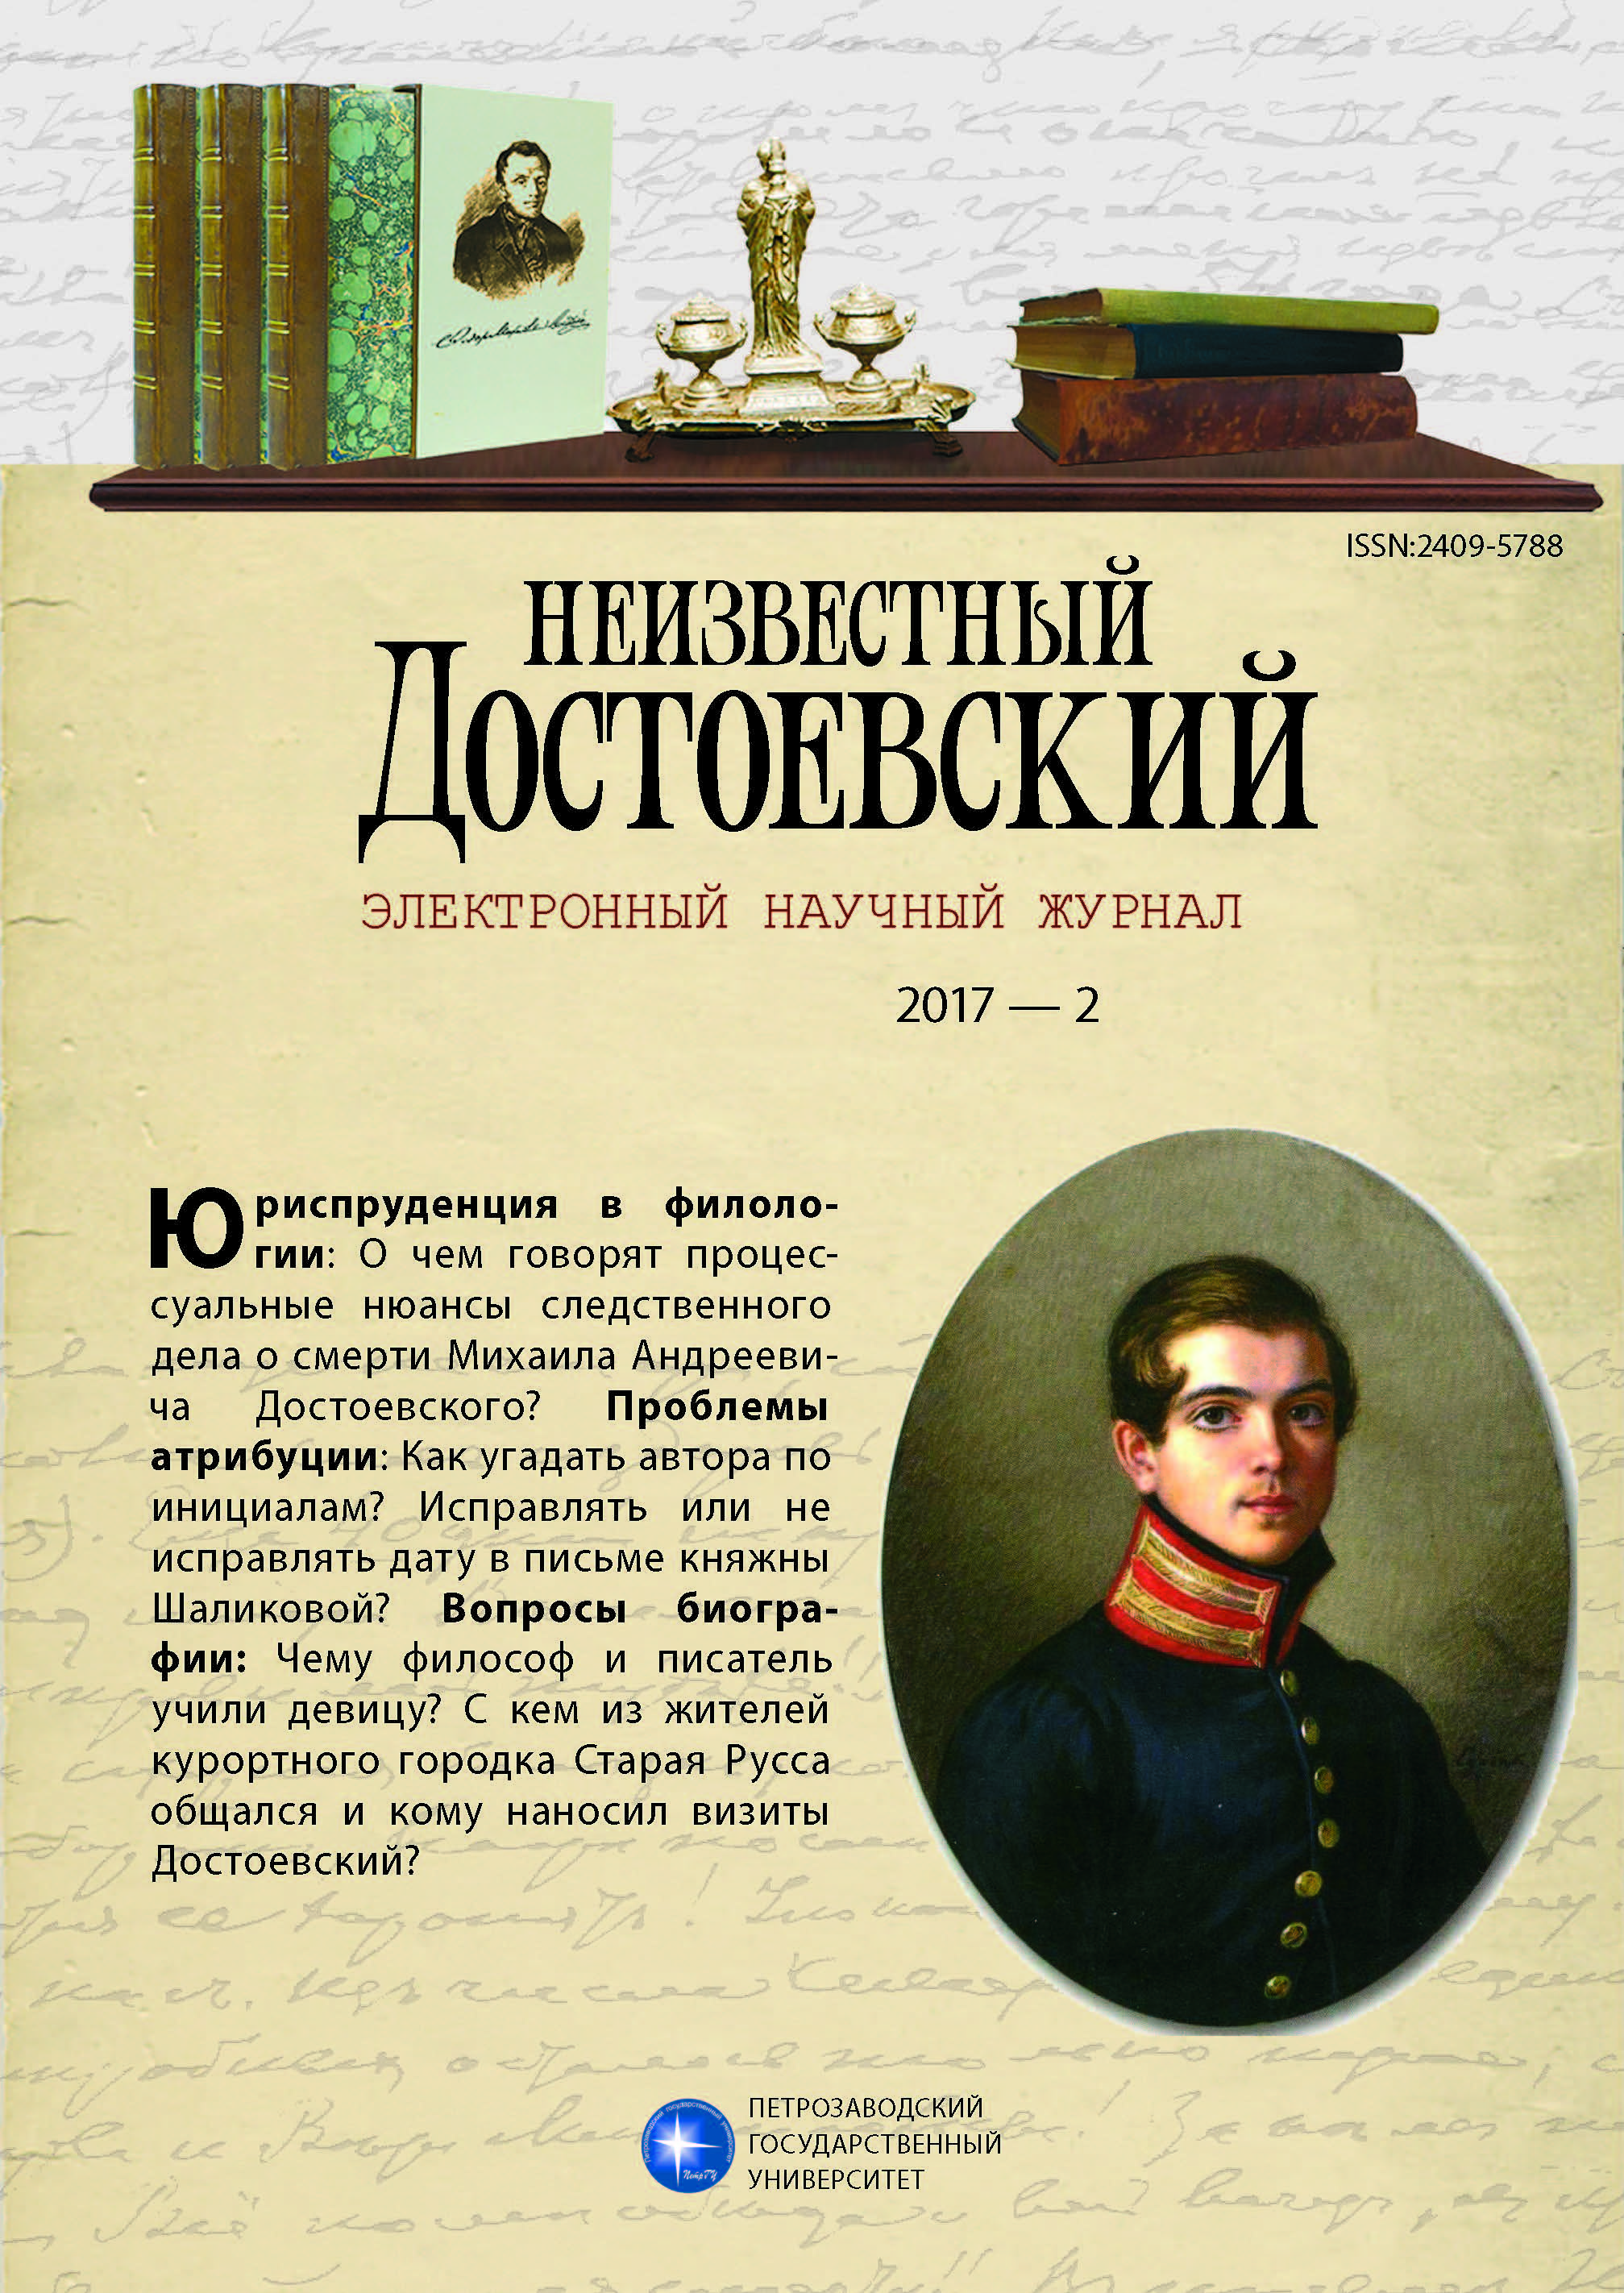 “A Friend of Writers” Mikhail Yazykov and Fedor Dostoevsky: History of Relationship in Letters, Attribution, Commentary Cover Image